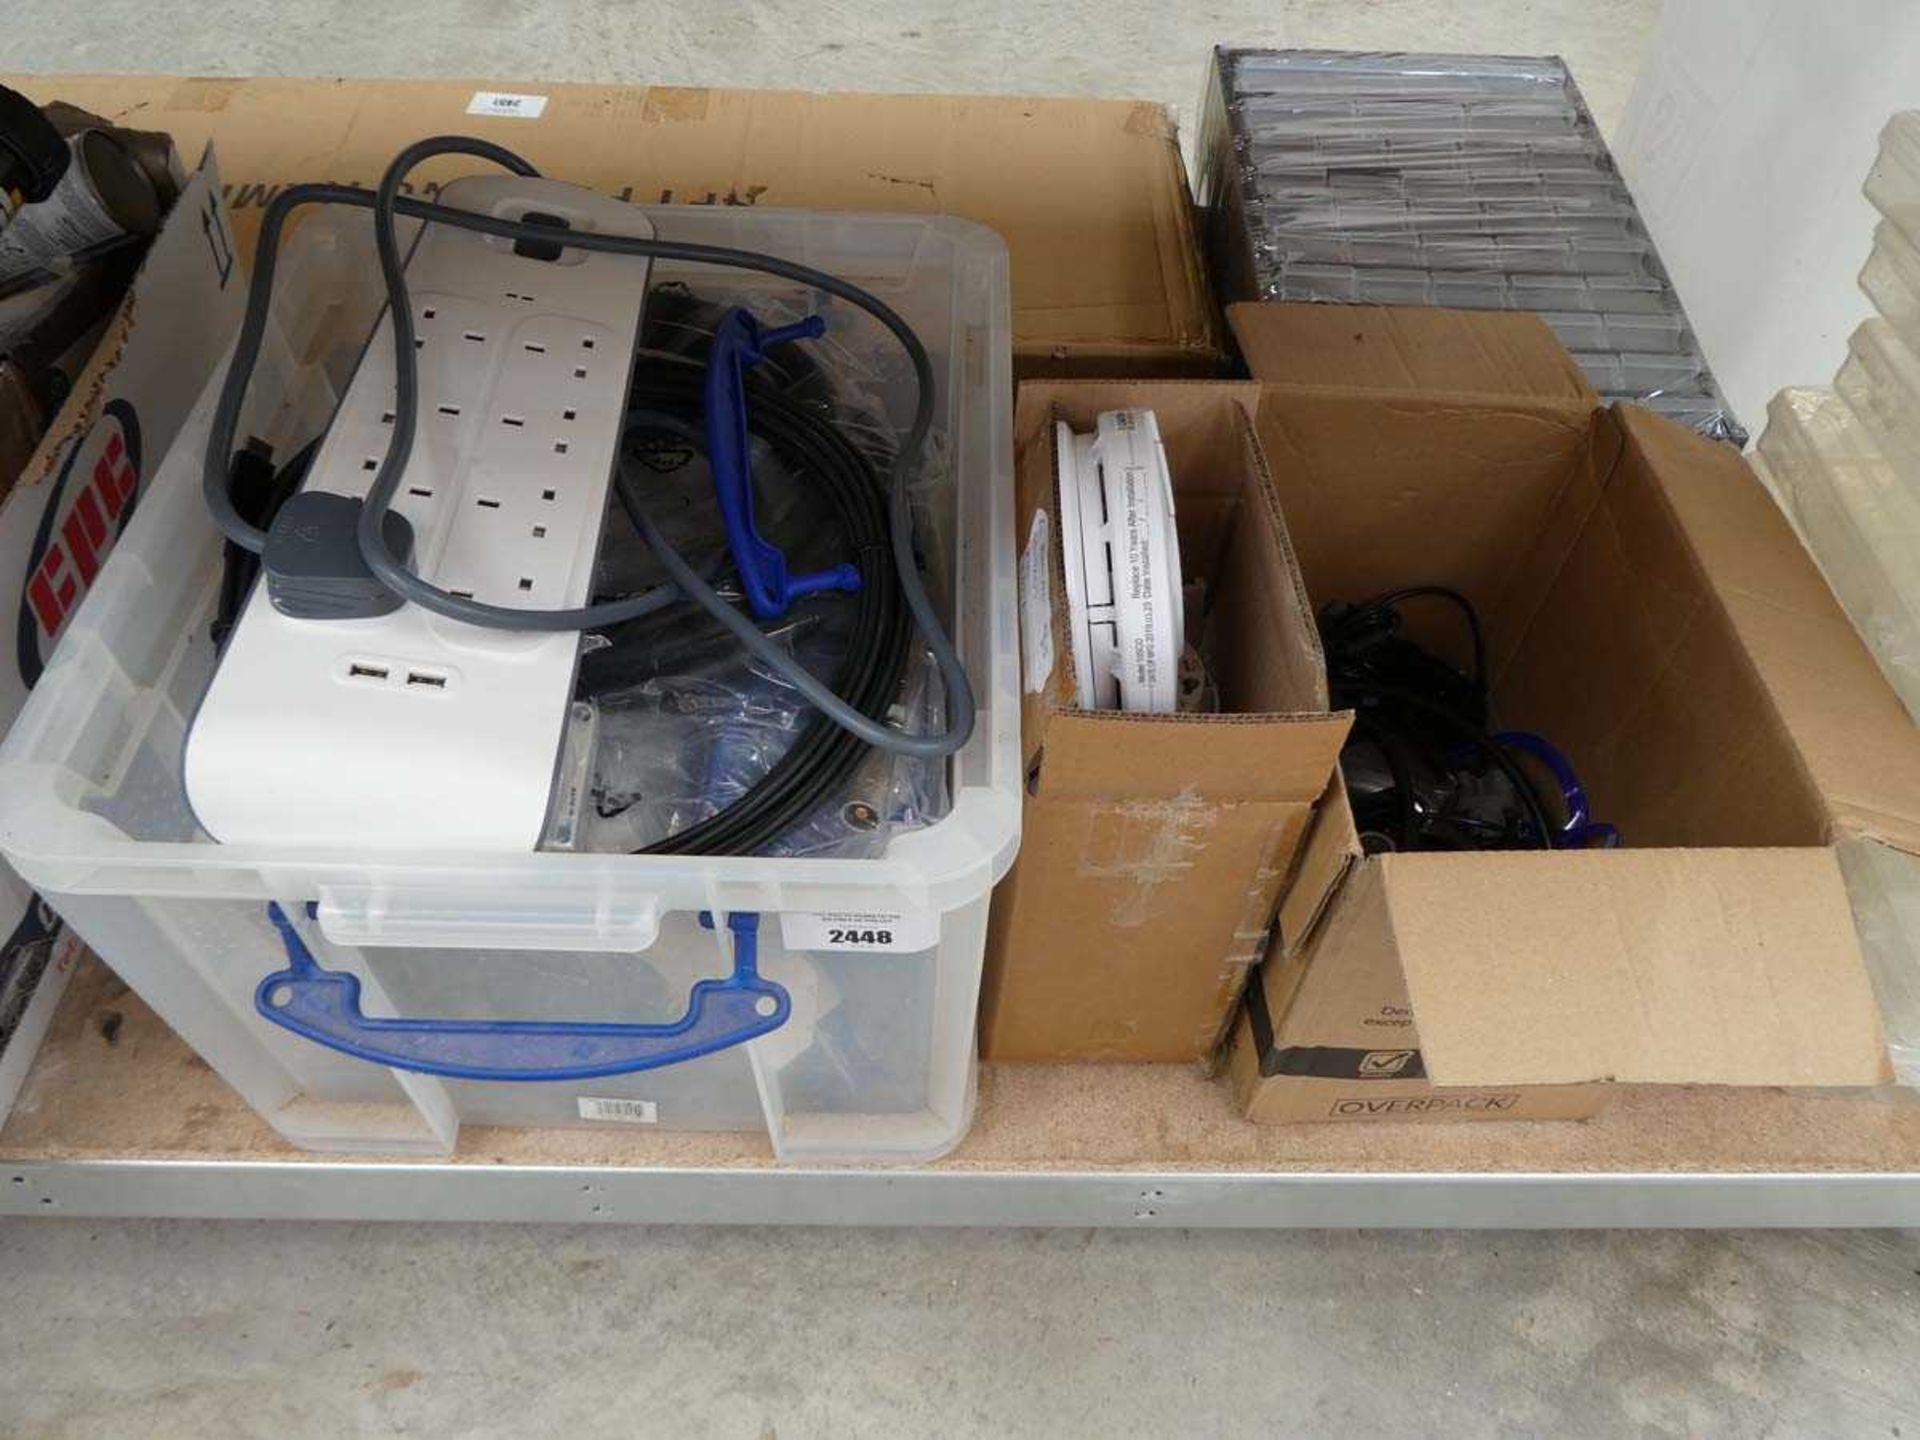 +VAT Box incl. extension lead with 2 other boxes incl. smoke detectors and extension cables